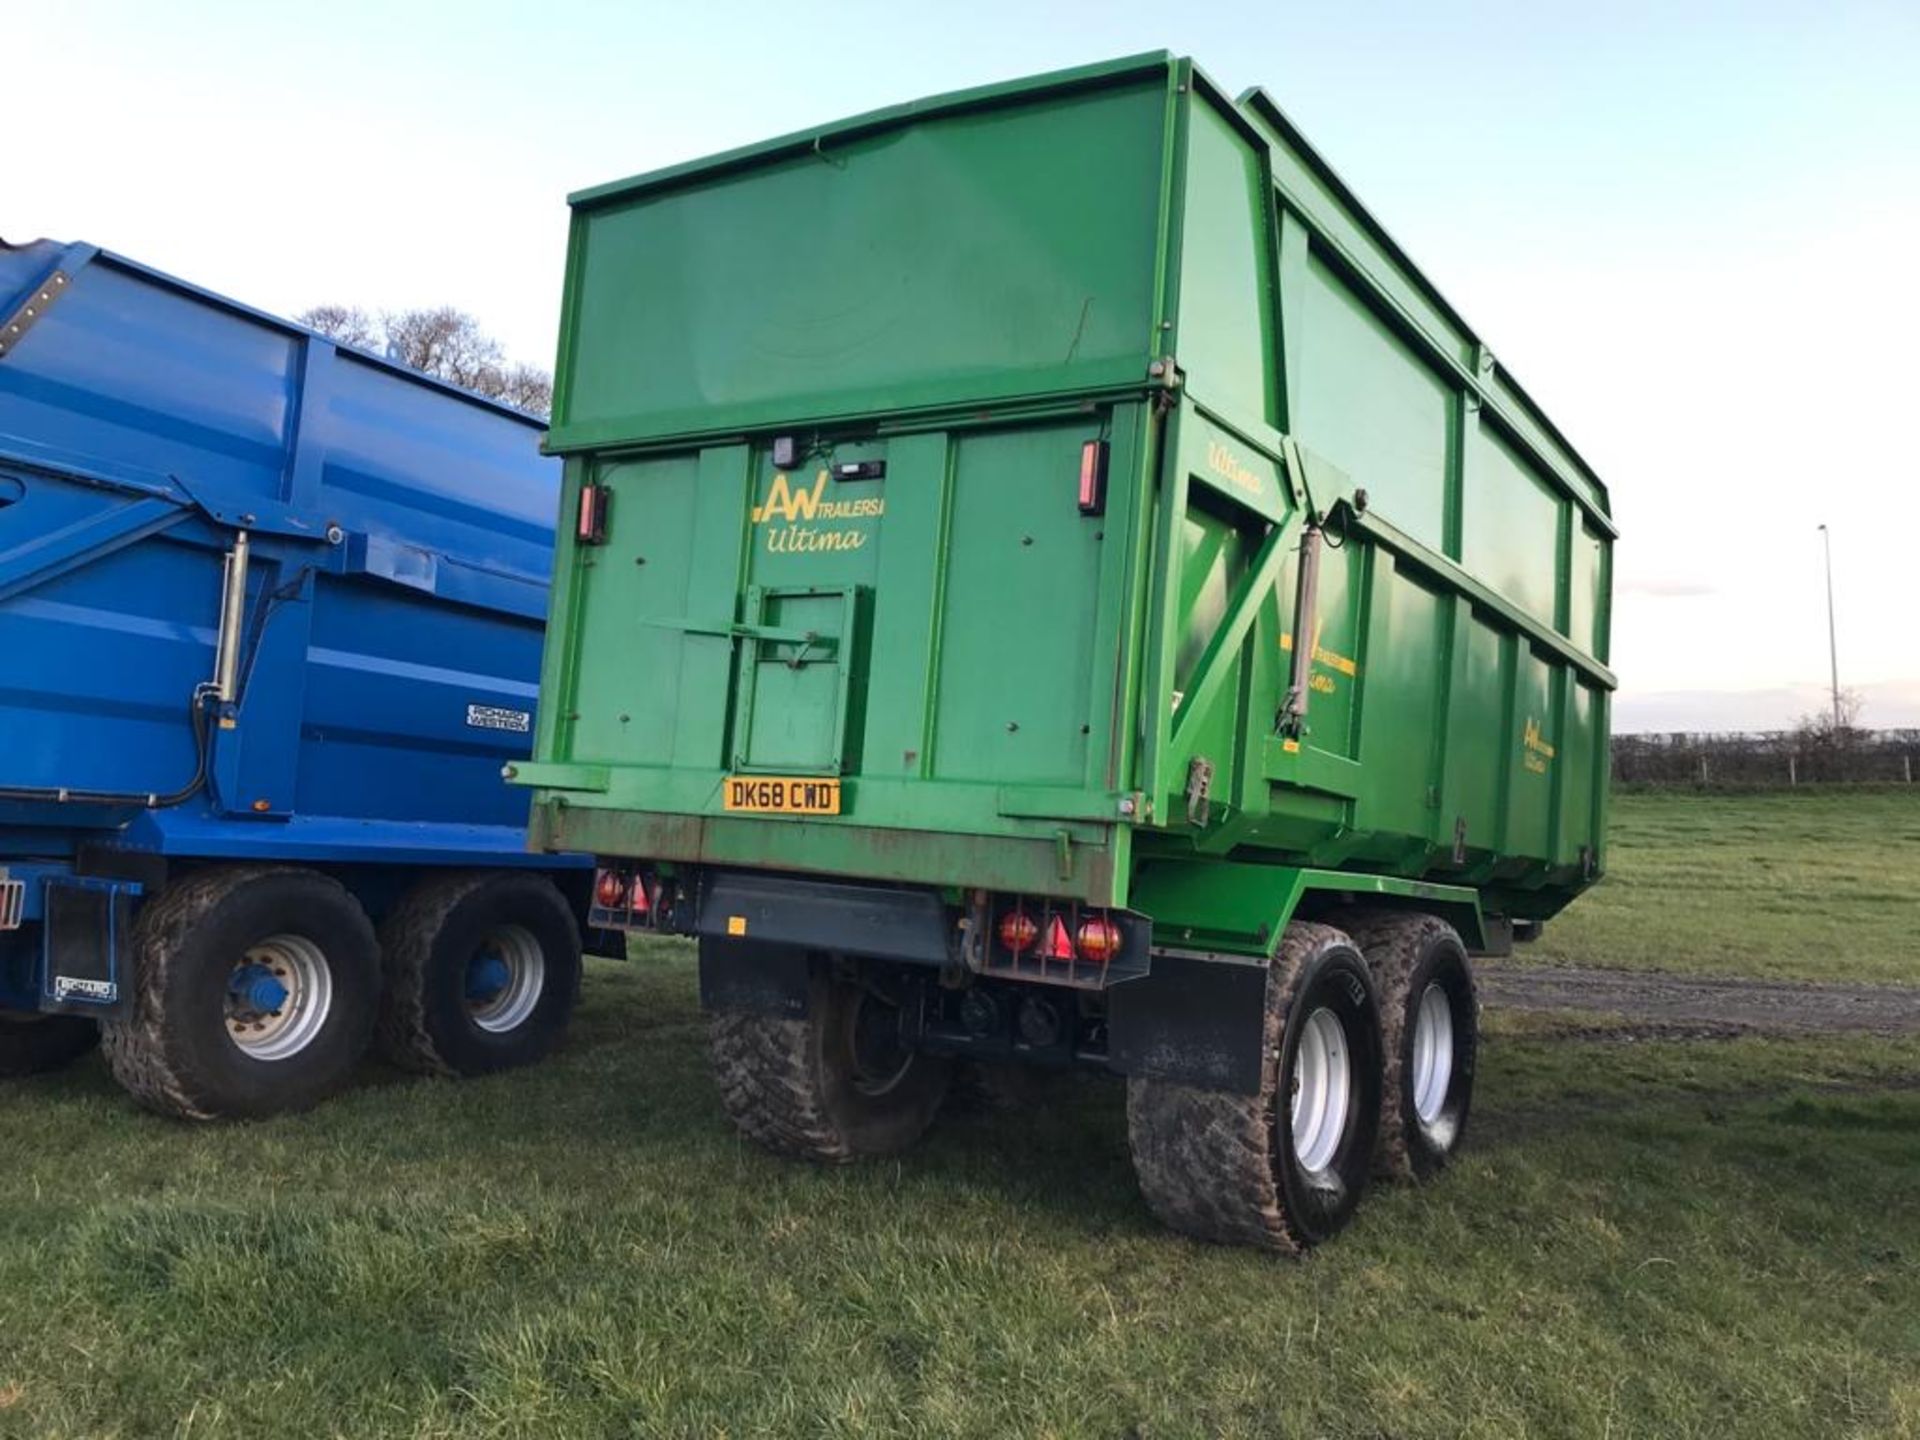 2015 AW 16 Tonne Ultima Silage Trailer, Hyd. Back Door, Sprung Drawbar, 560/65 R22.5 Tyres - Image 3 of 6